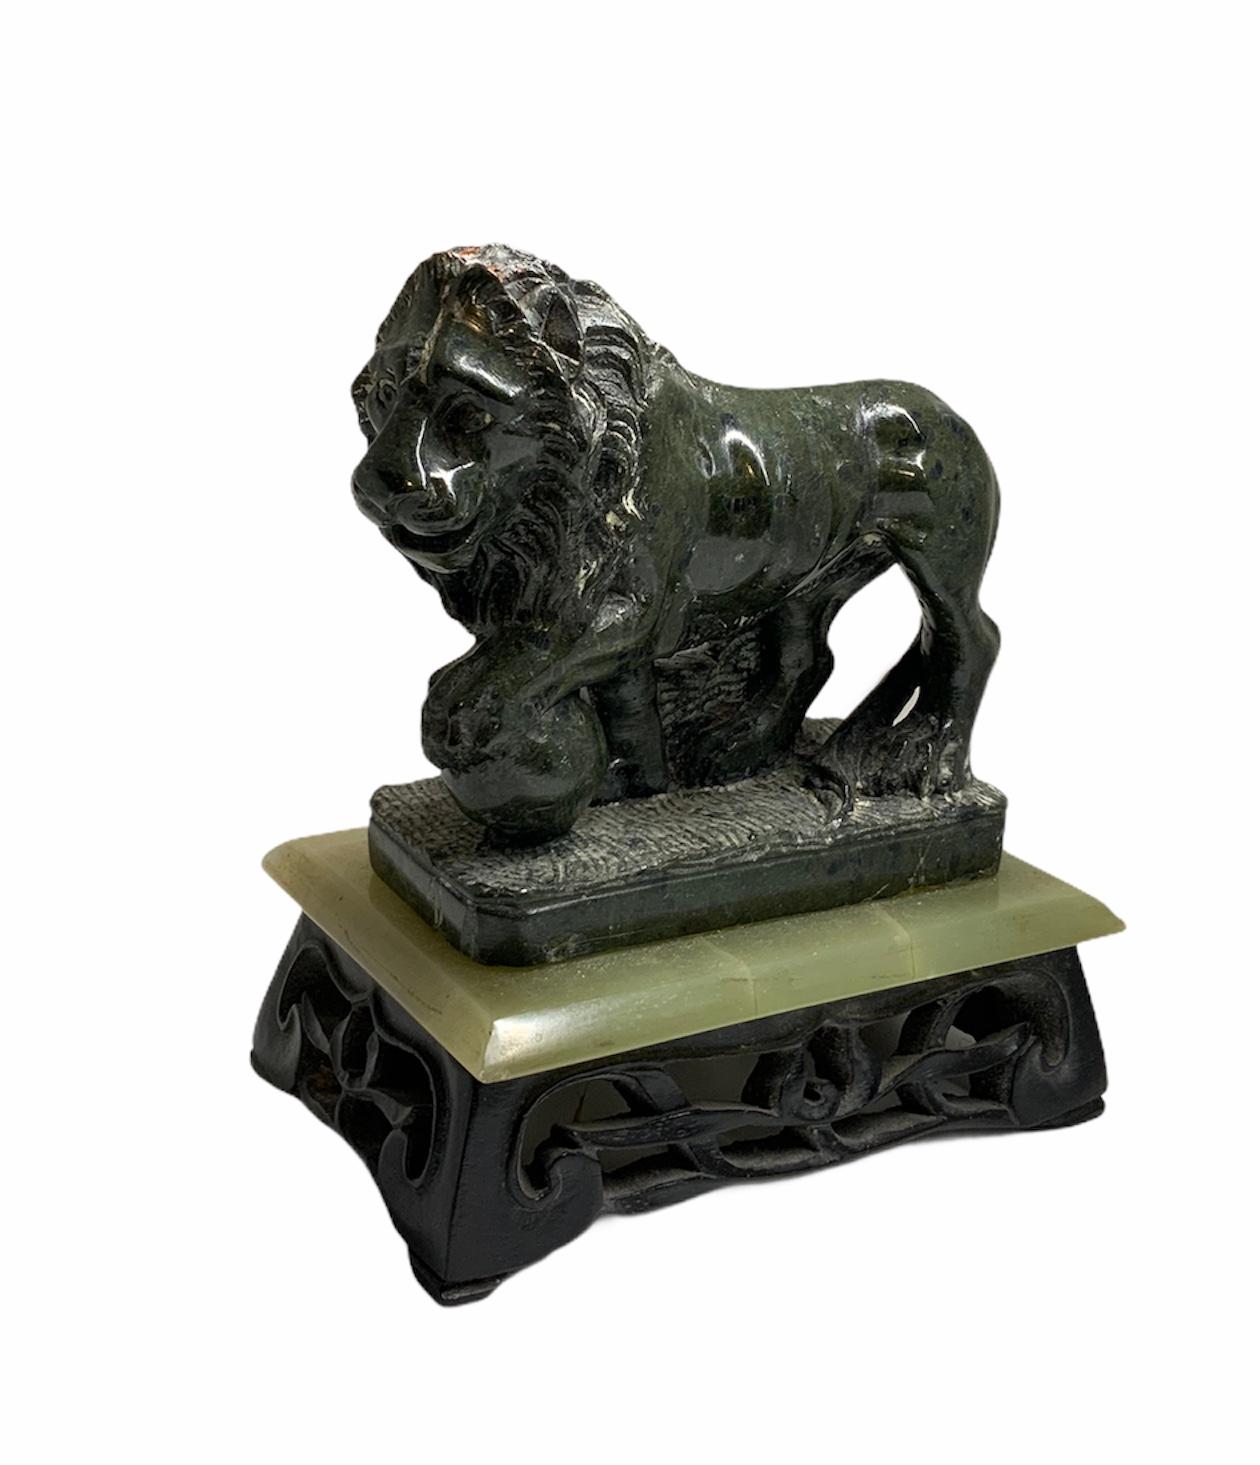 Medici Lion Stone Sculpture After the Antique Ones in Florence 1